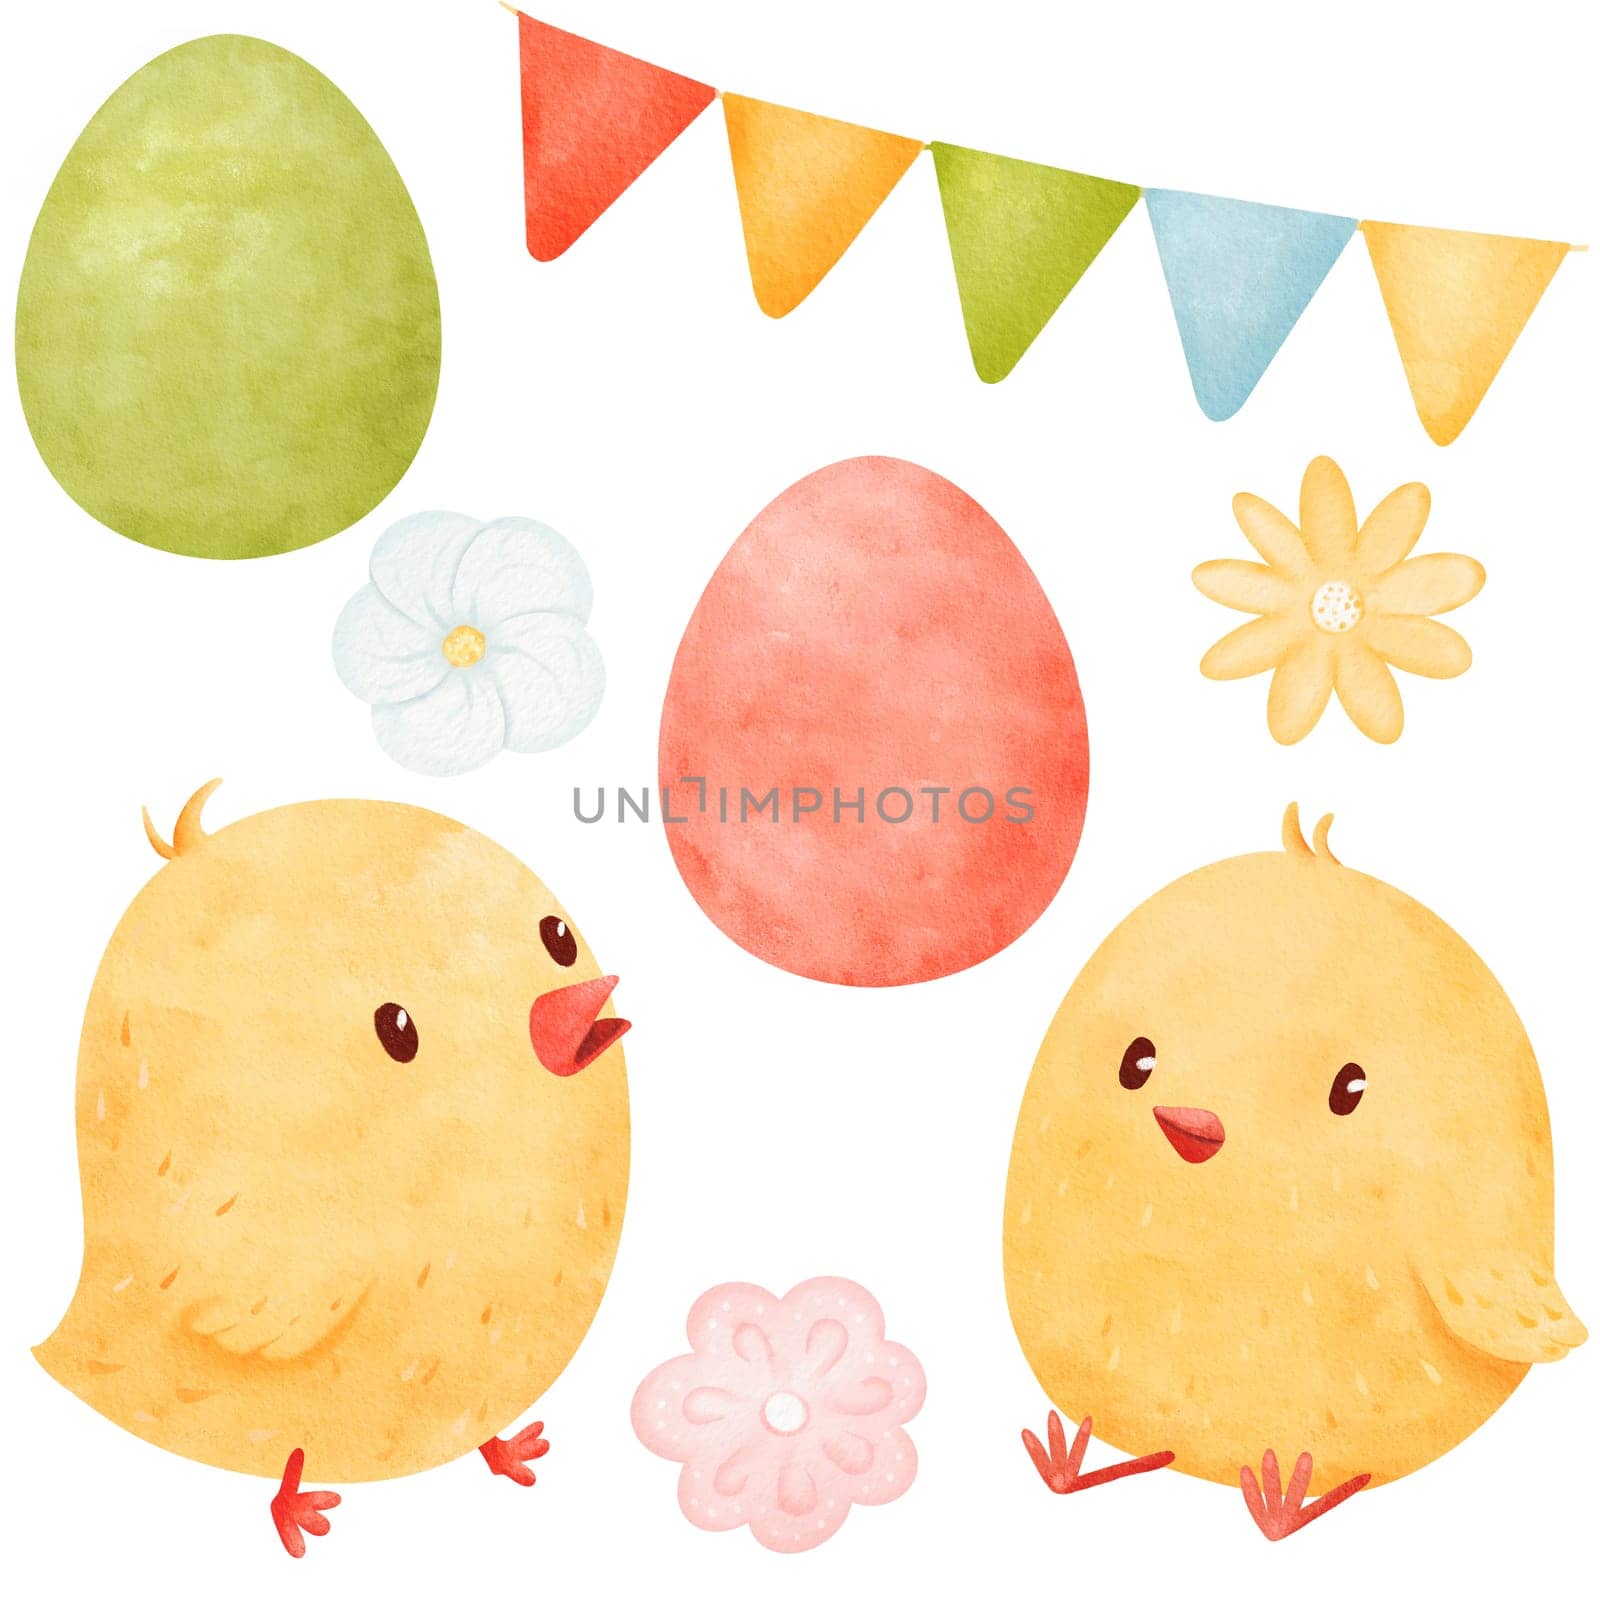 watercolor set. adorable chicks, vibrantly colored eggs, spring flowers, and a birthday garland. cartoon style. for various creative projects. From Easter-themed illustrations to festive designs.